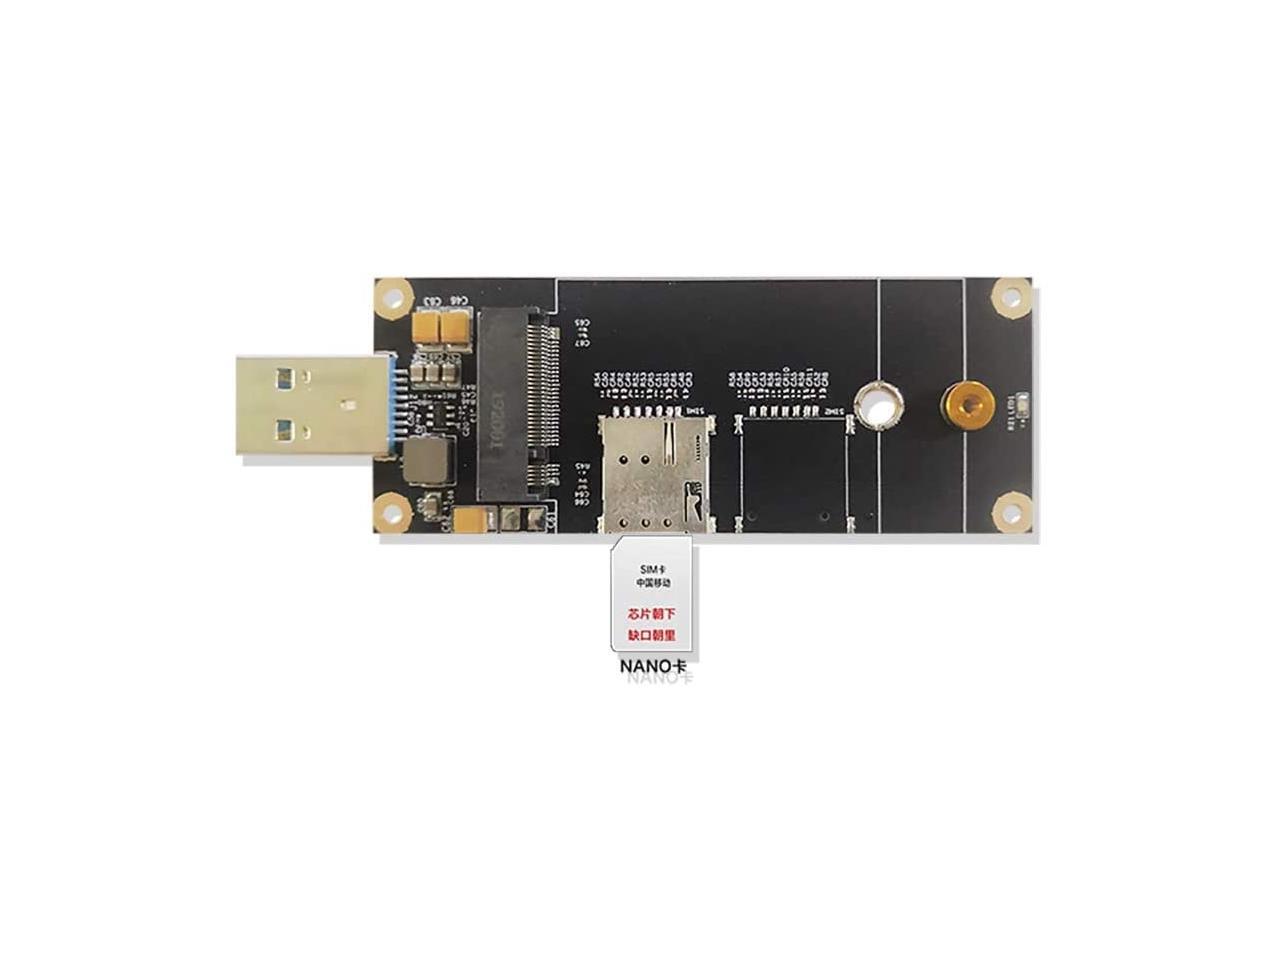 EXVIST 5G LTE Industrial M.2(NGFF) to USB3.0 Adapter W/Nano SIM Card Slot  for 5G LTE Module Like Quectel RM500Q etc. Applicable for M2M  IoT  Applications Like Raspberry Pi Industrial Router etc. -